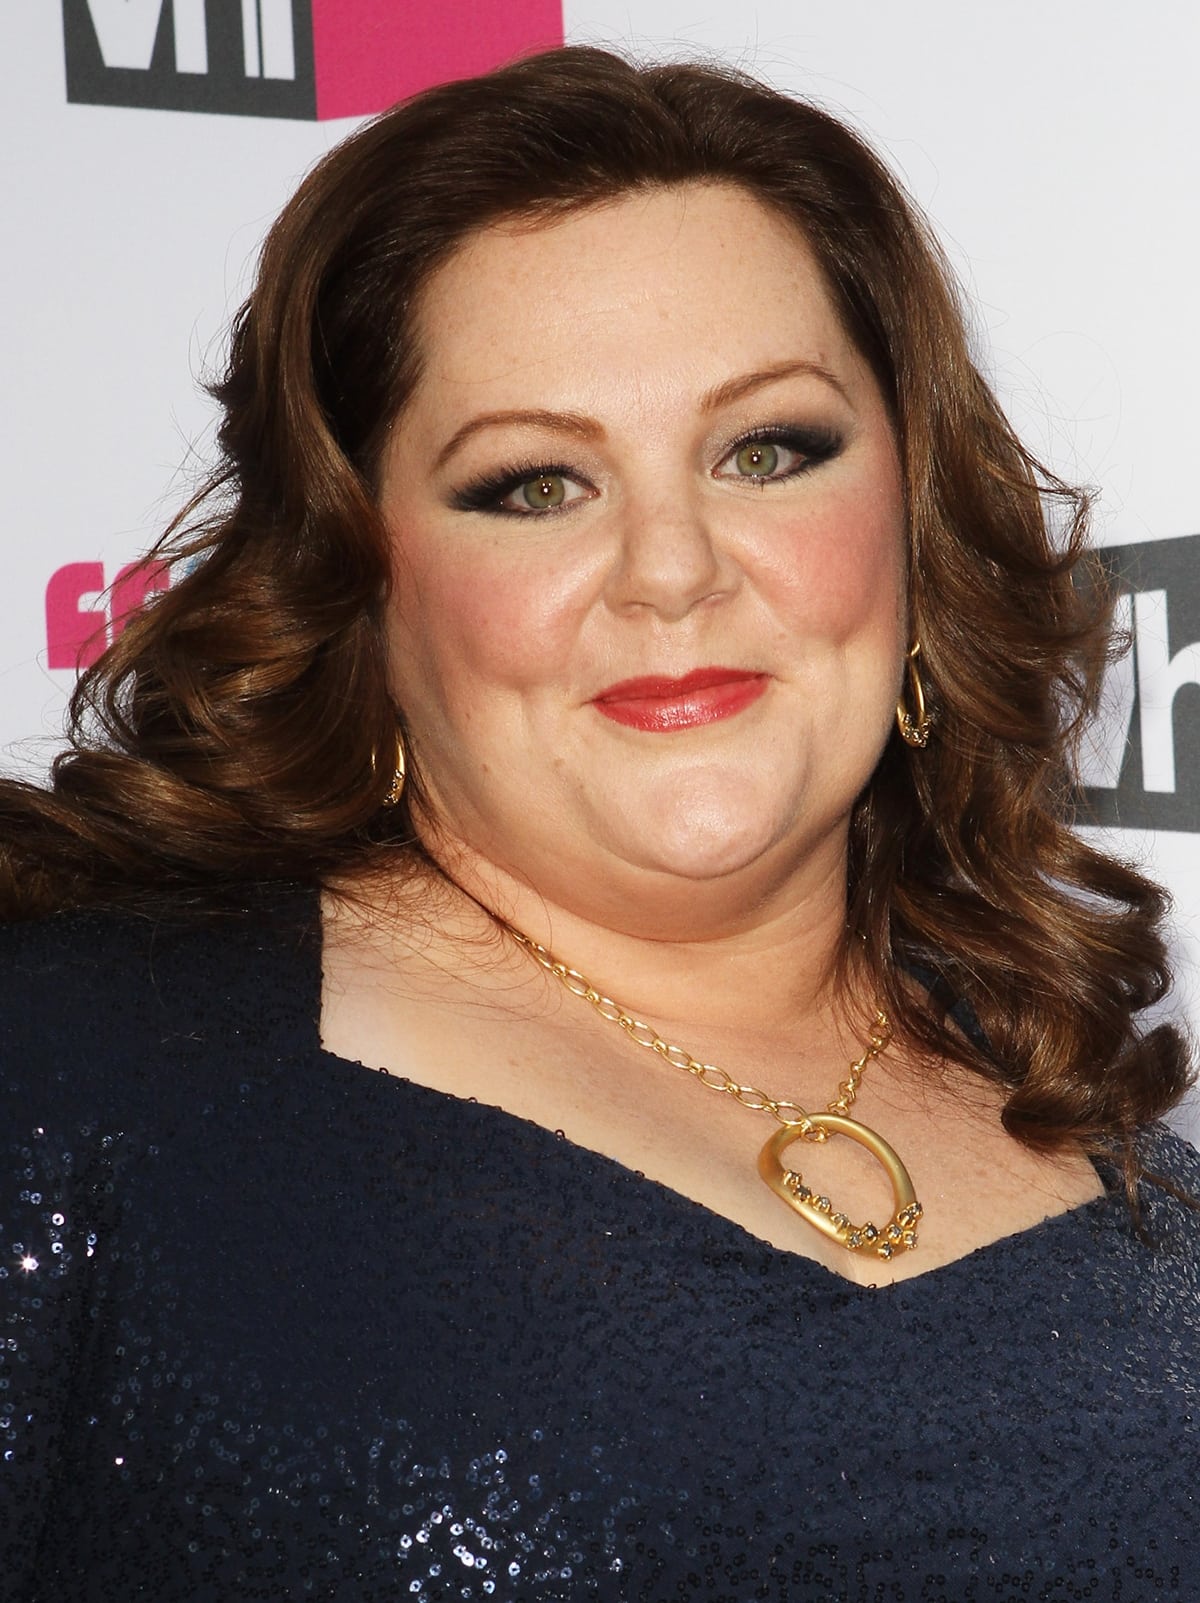 Melissa McCarthy tried a doctor-supervised all-liquid diet and lost 70 pounds in four months after landing her role on Gilmore Girls